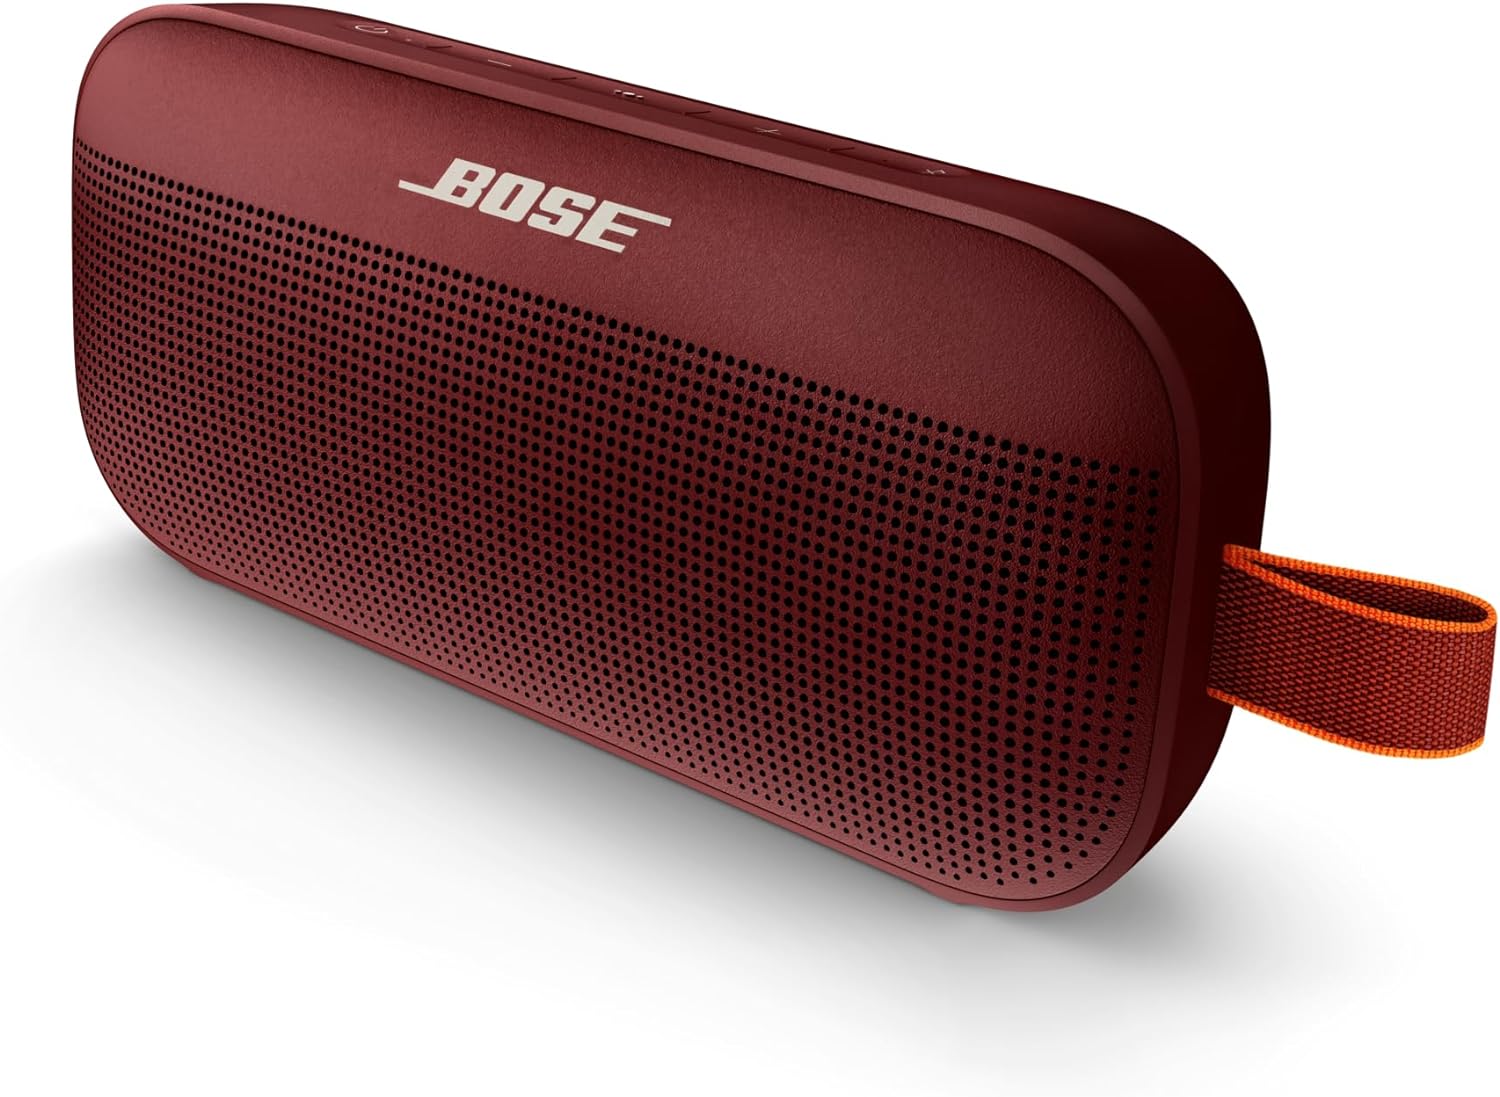 Bose SoundLink Flex Bluetooth speaker in Carmine Red - Astonishing acoustic performance for clear, distortion-free sound. 0017817832076